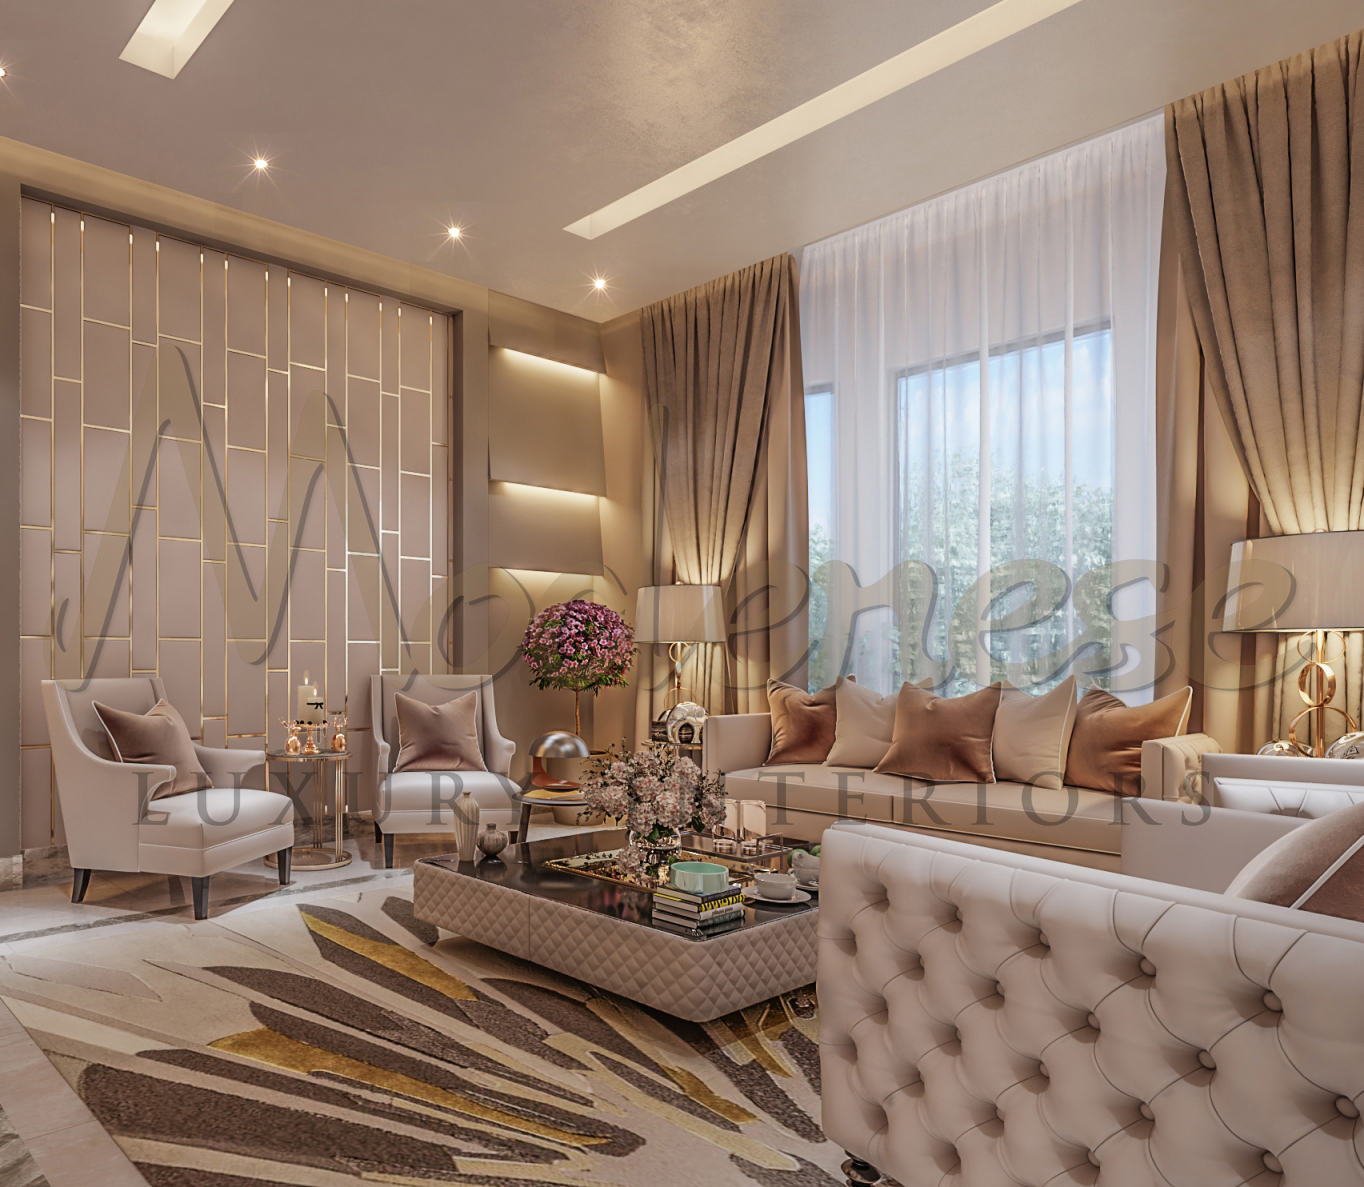 Exquisite Customized Furniture for exclusive living room design. High-end bespoke furniture design. Top interior design company in Riyadh. Superb living room design idea for spacious mansion.